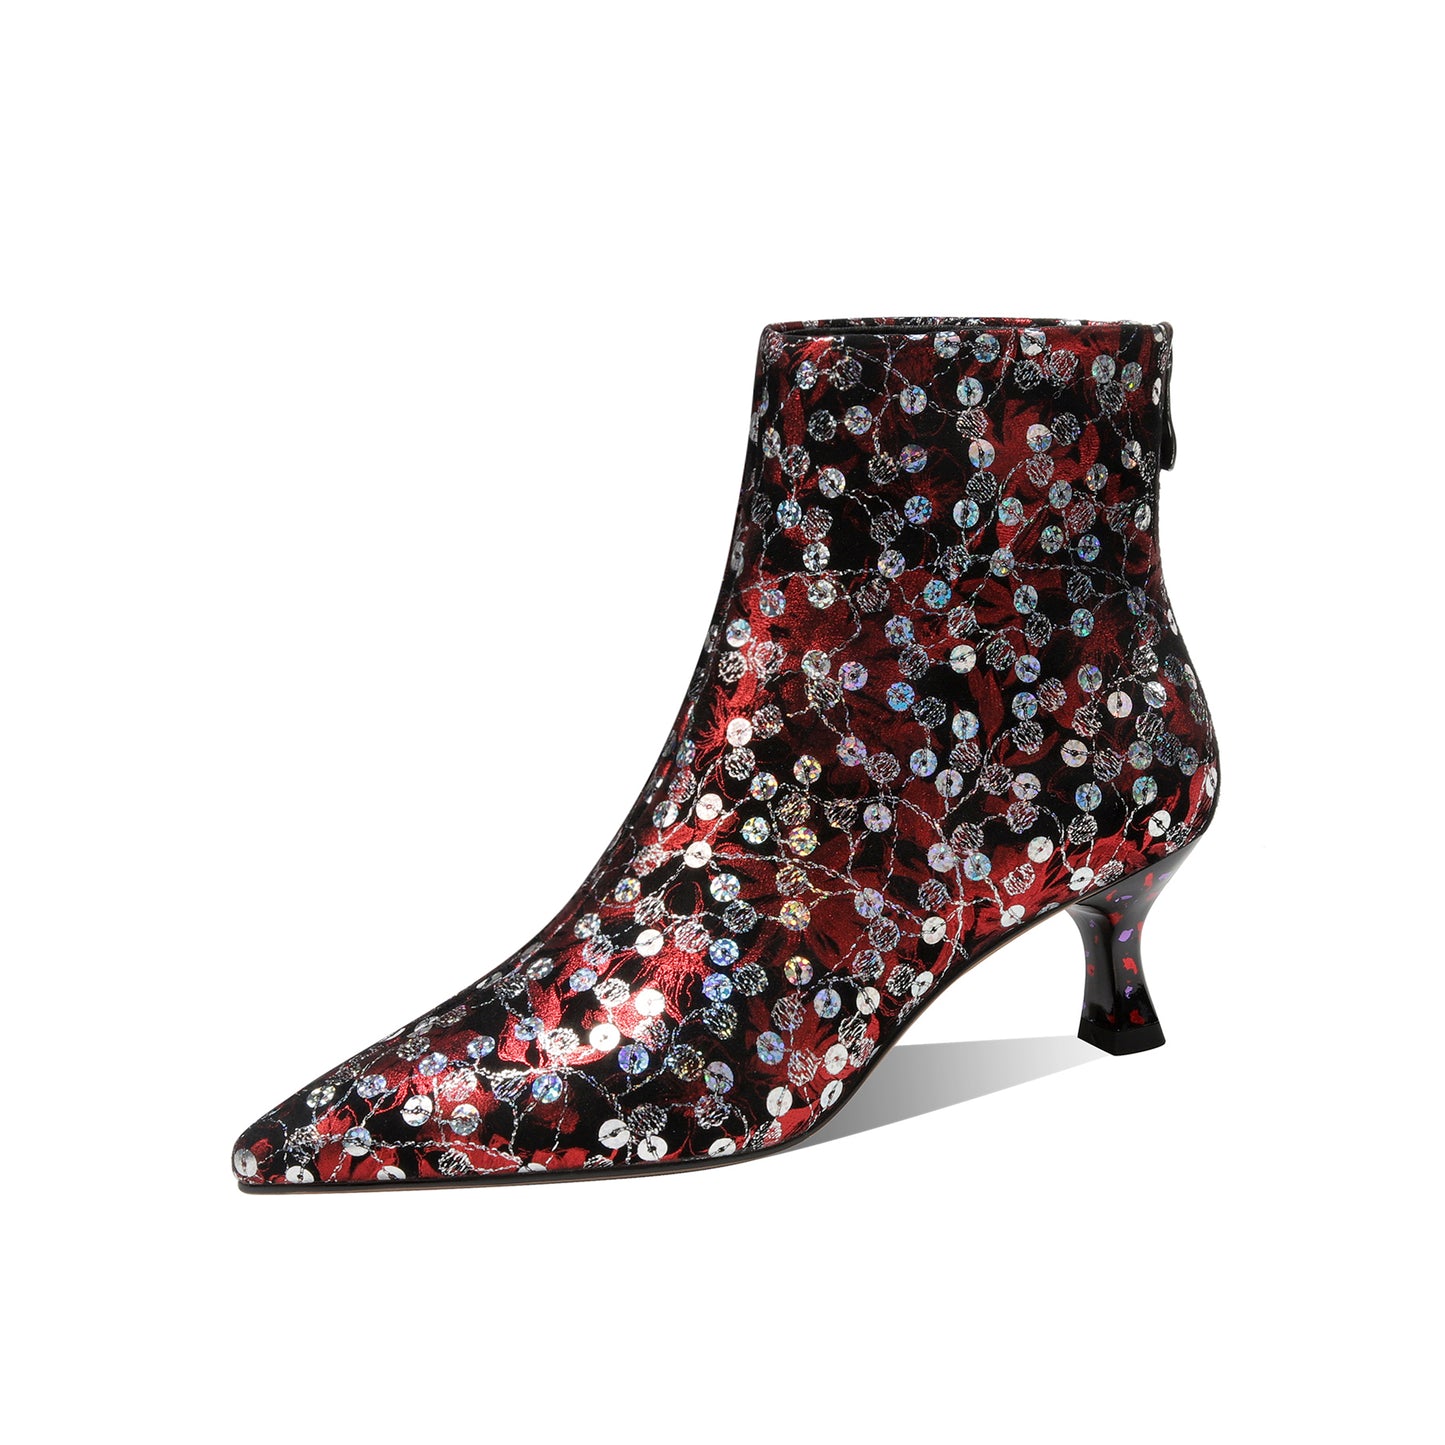 TinaCus Women's Handmade Genuine Leather Colorful Flowers Print Sequins Zip Up Ankle Boots